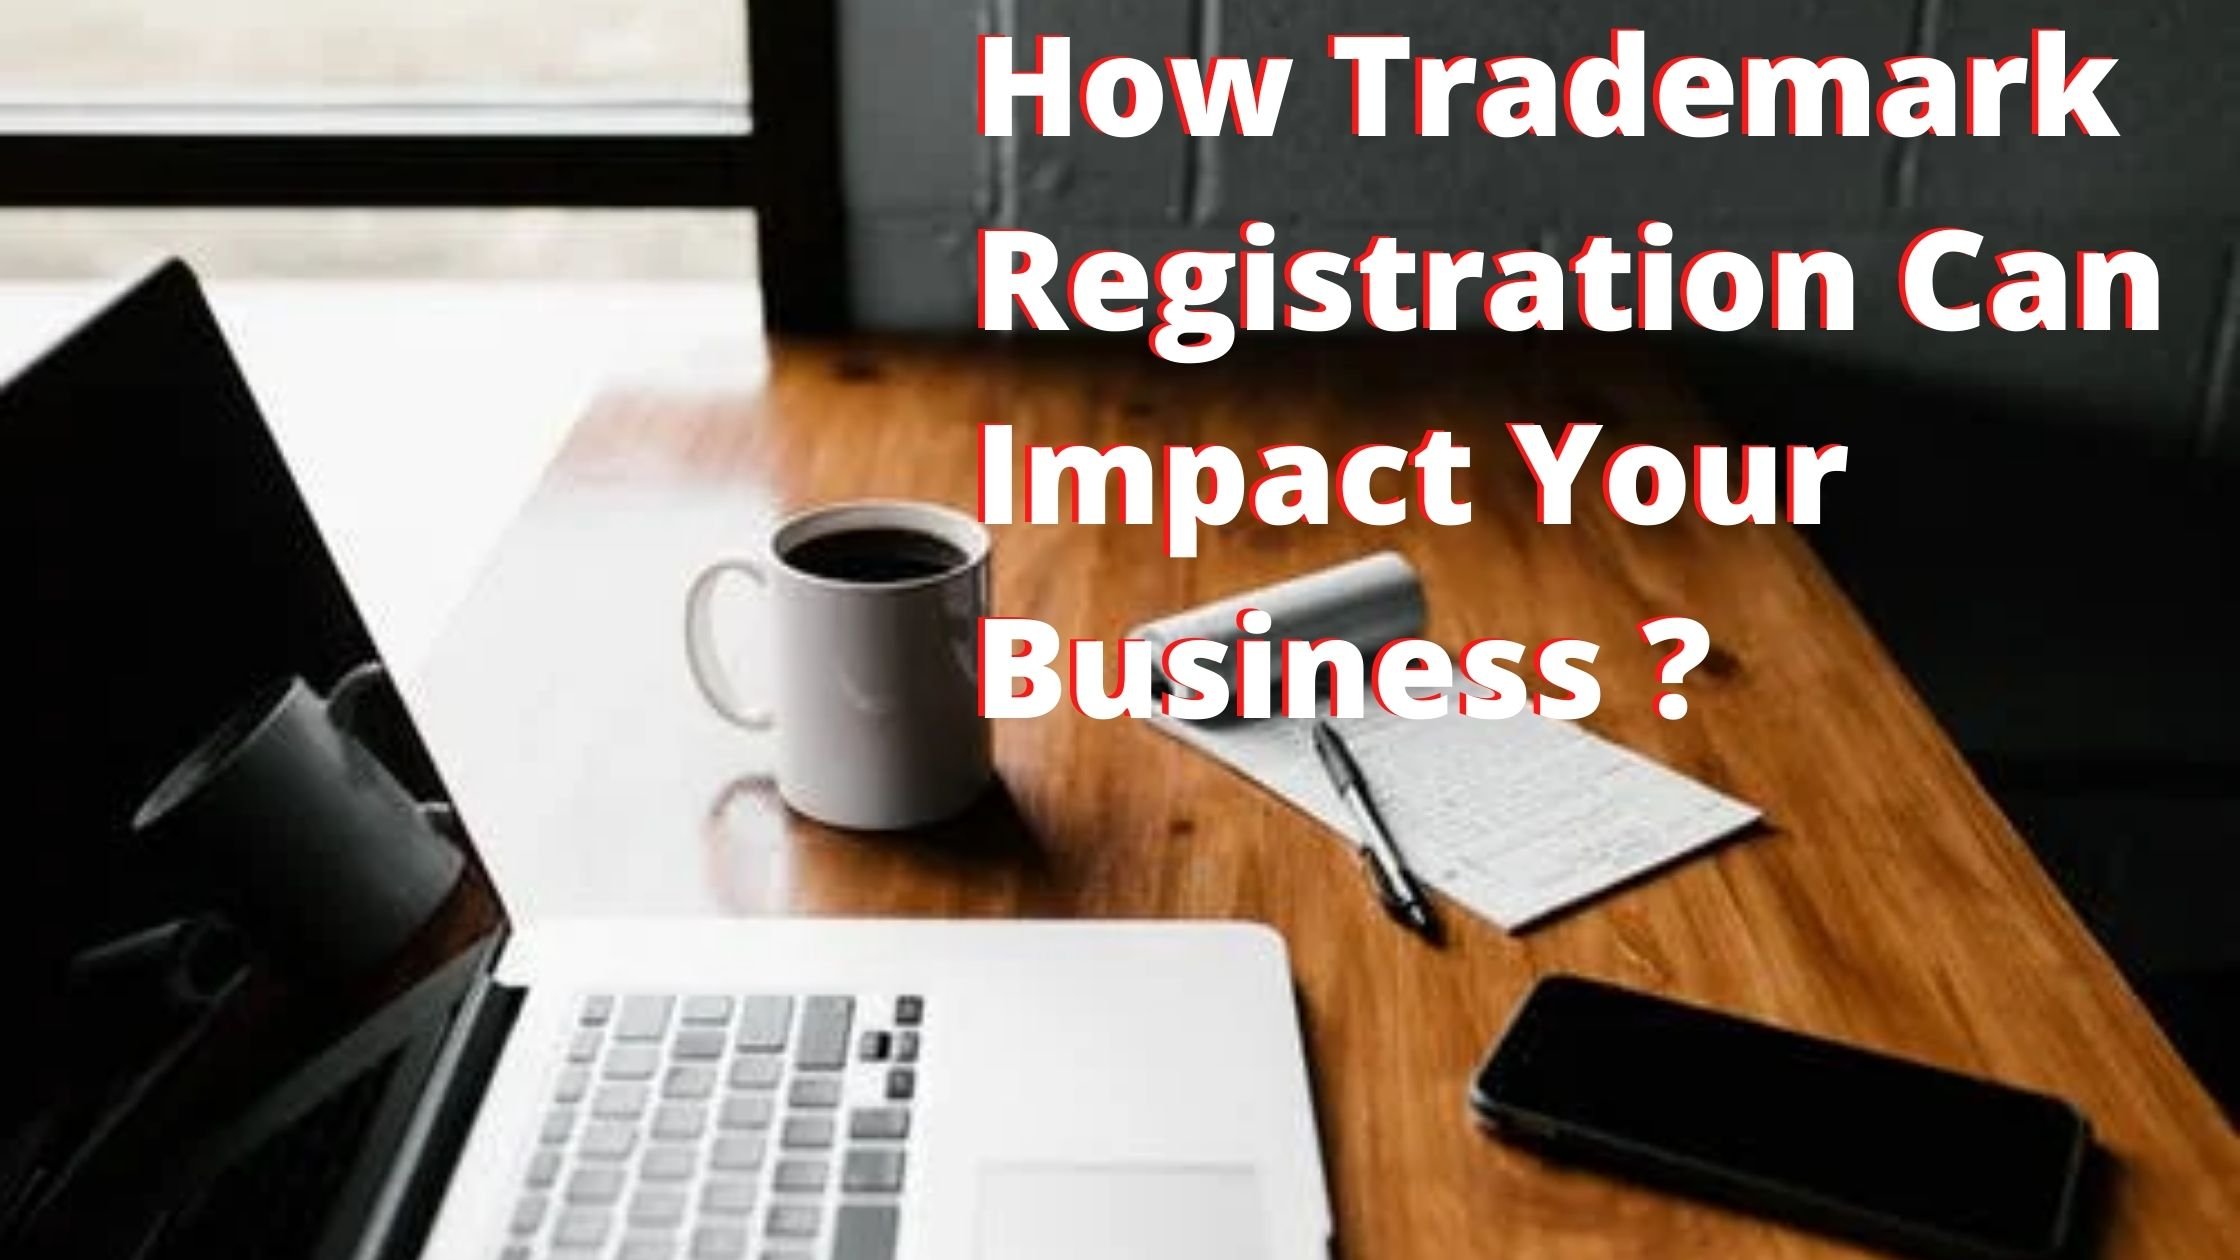 Know-How Trademark Registration Can Impact Your Business